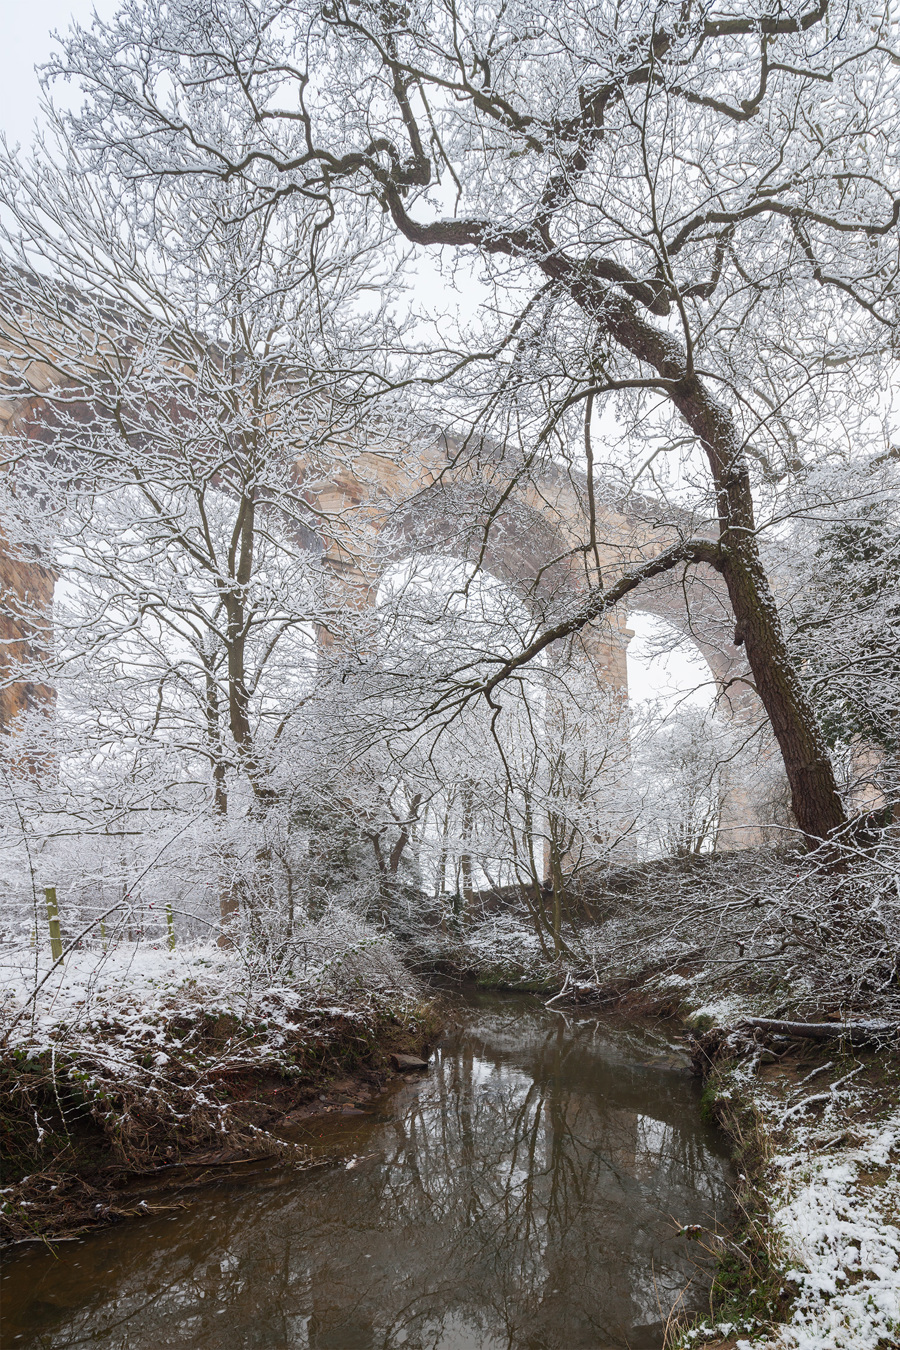 The river Crimple runing towards the Crimple Viaduct with large tree in the foreground a tree with snow on the ground